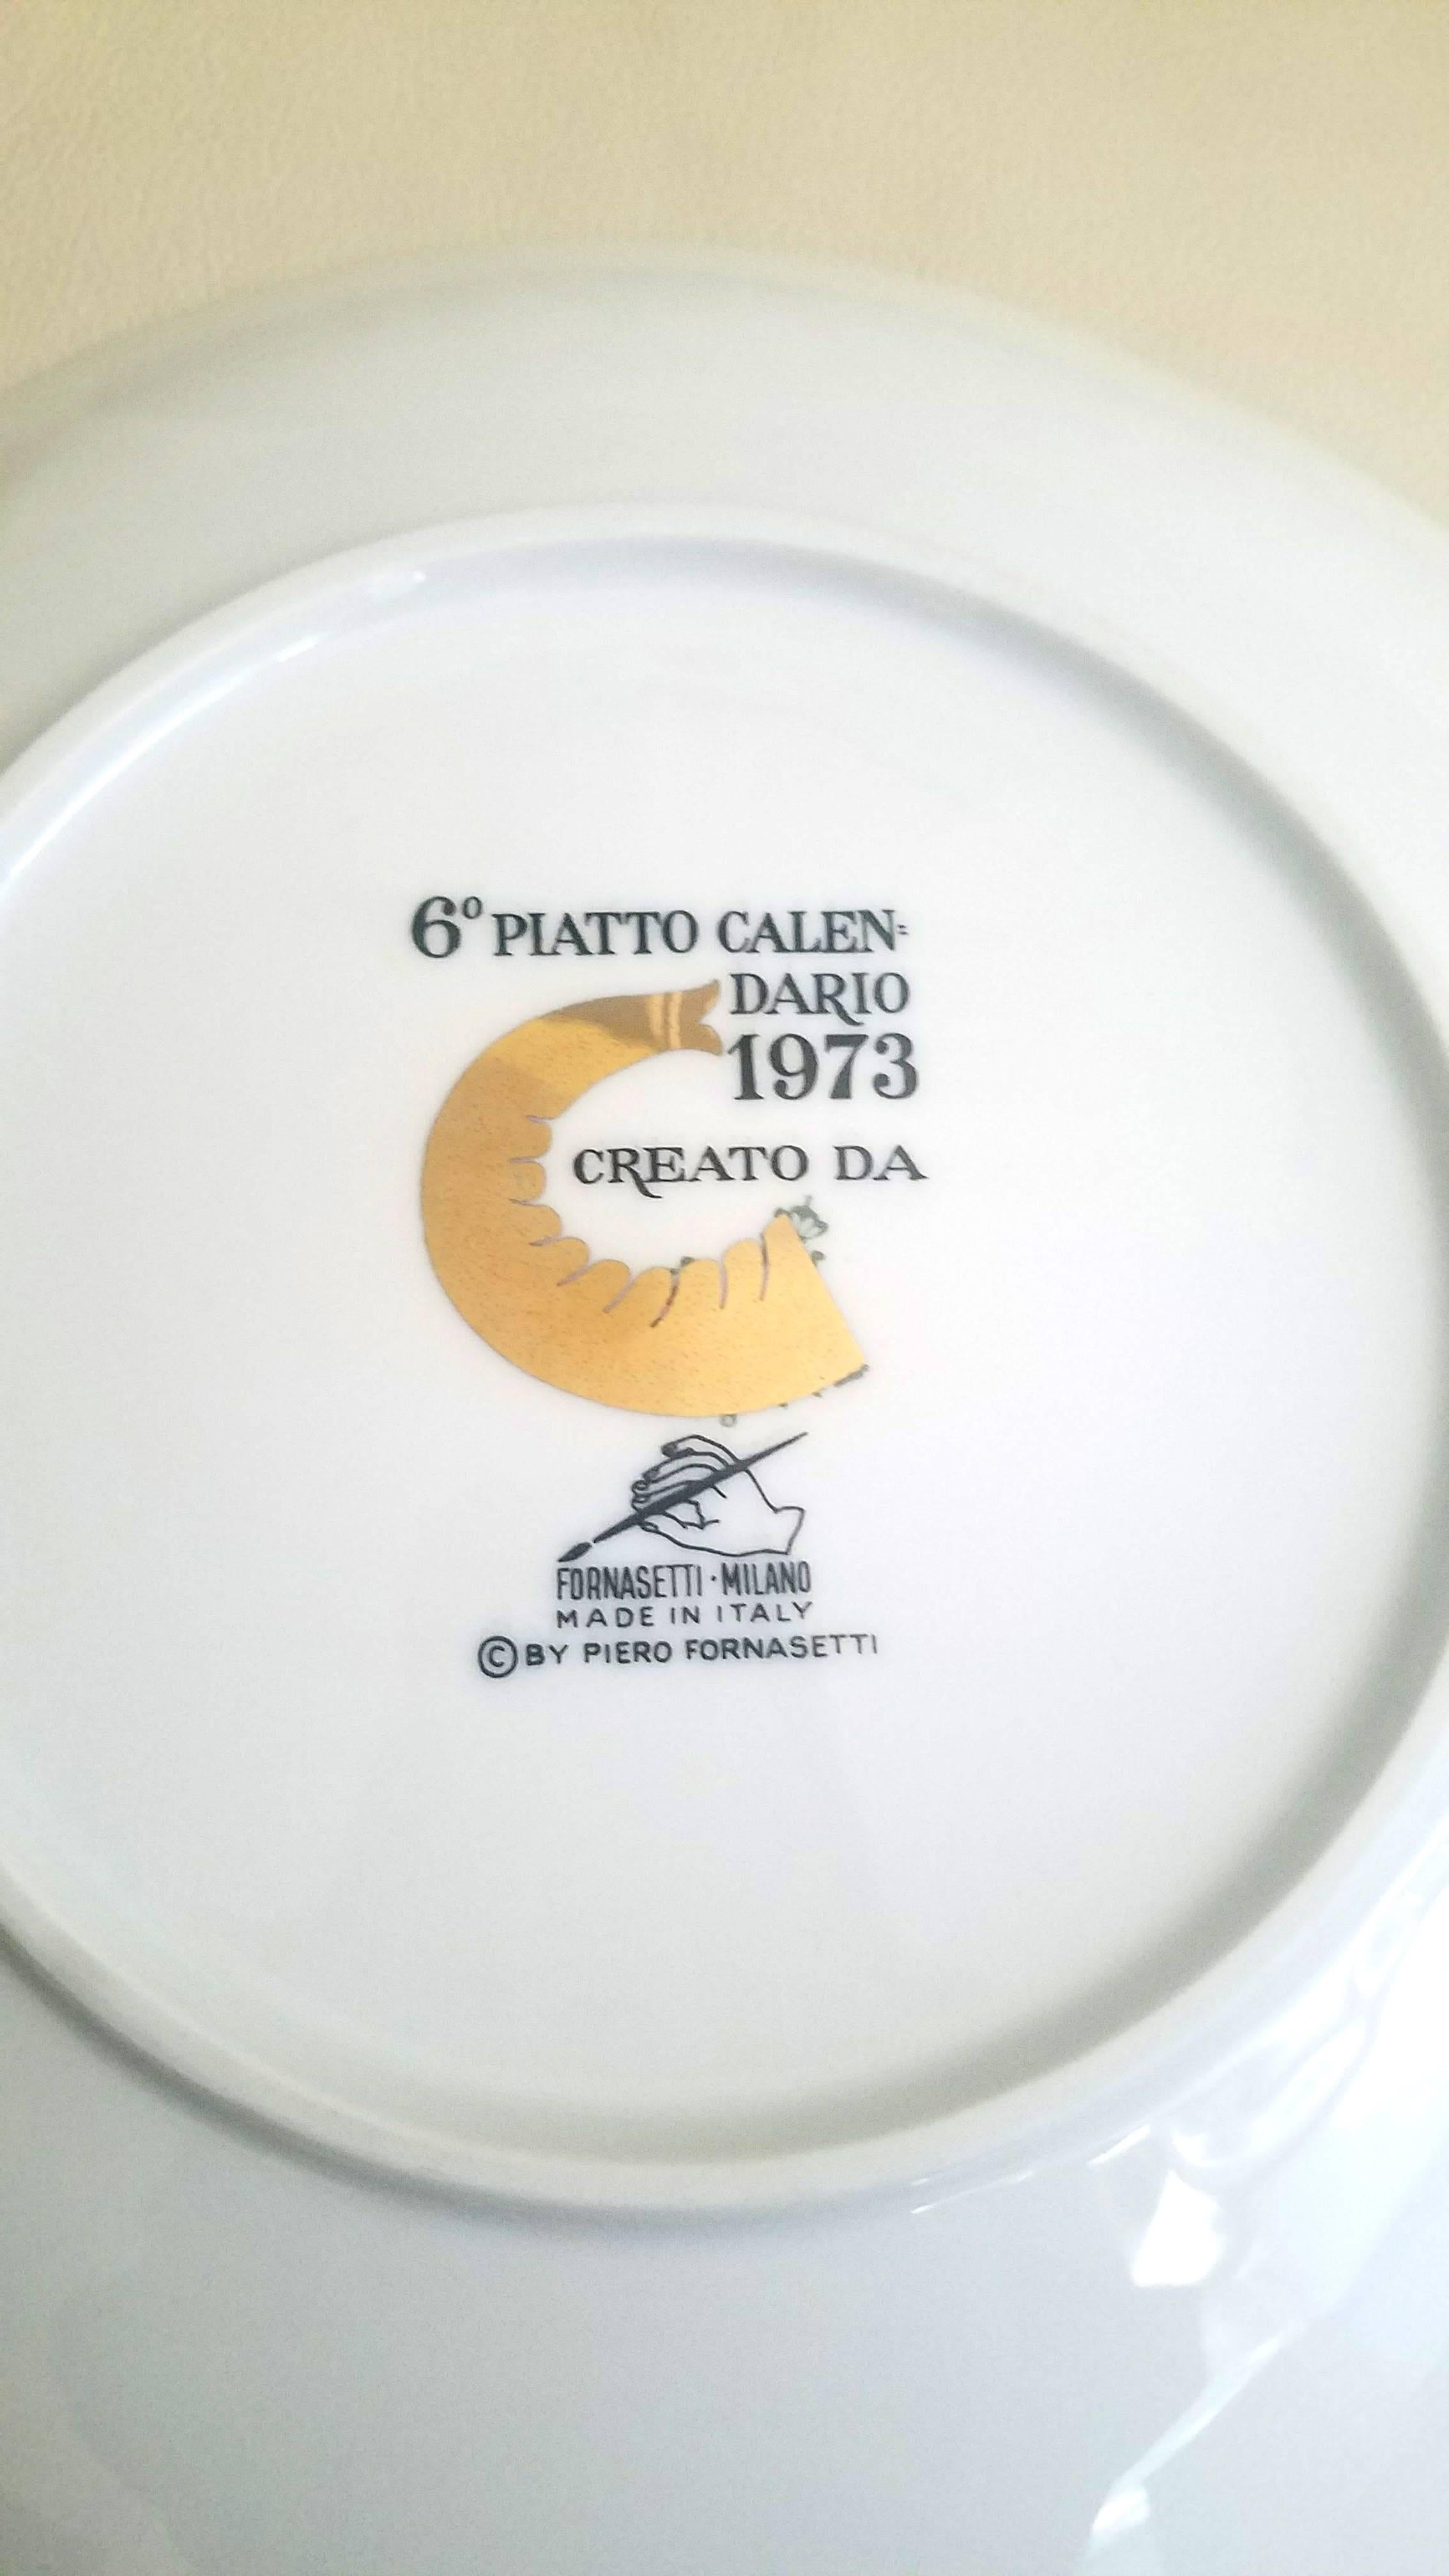 The plate depicts a sitting happy elephant carrying a crate on its back containing the months of the year 1973.

According to the Fornasetti website, 